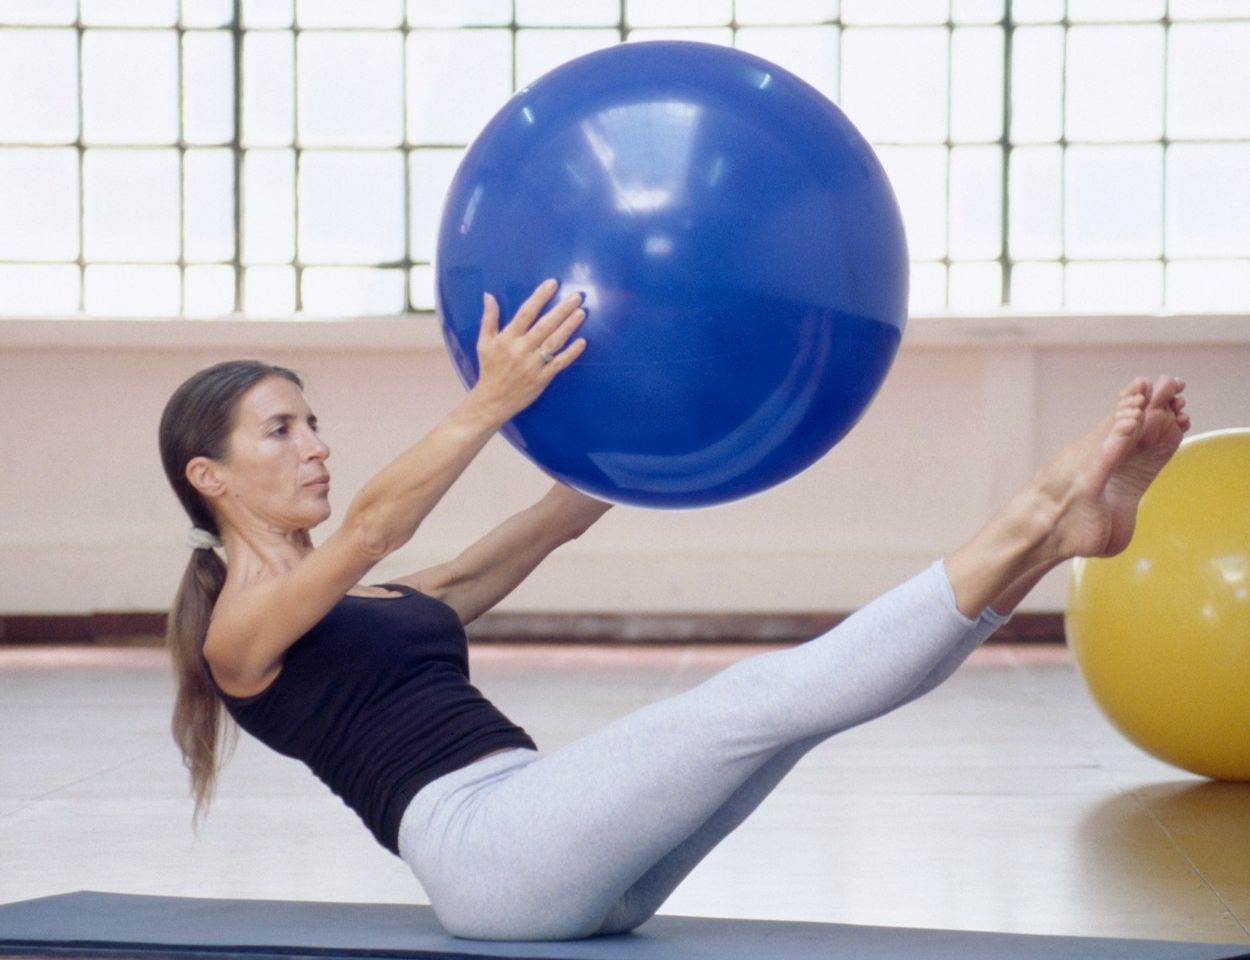  woman;female;exercises;exercise;pilates;exercising;system;method;technique;fitness;fit;healthy;health;balance;balancing;arm;stomach;leg;muscle;muscles;posture;pastime;hobby;sport;sporting;leisure;people;activity;activities;mat;floor;gym;gymnasium;swiss;ball 